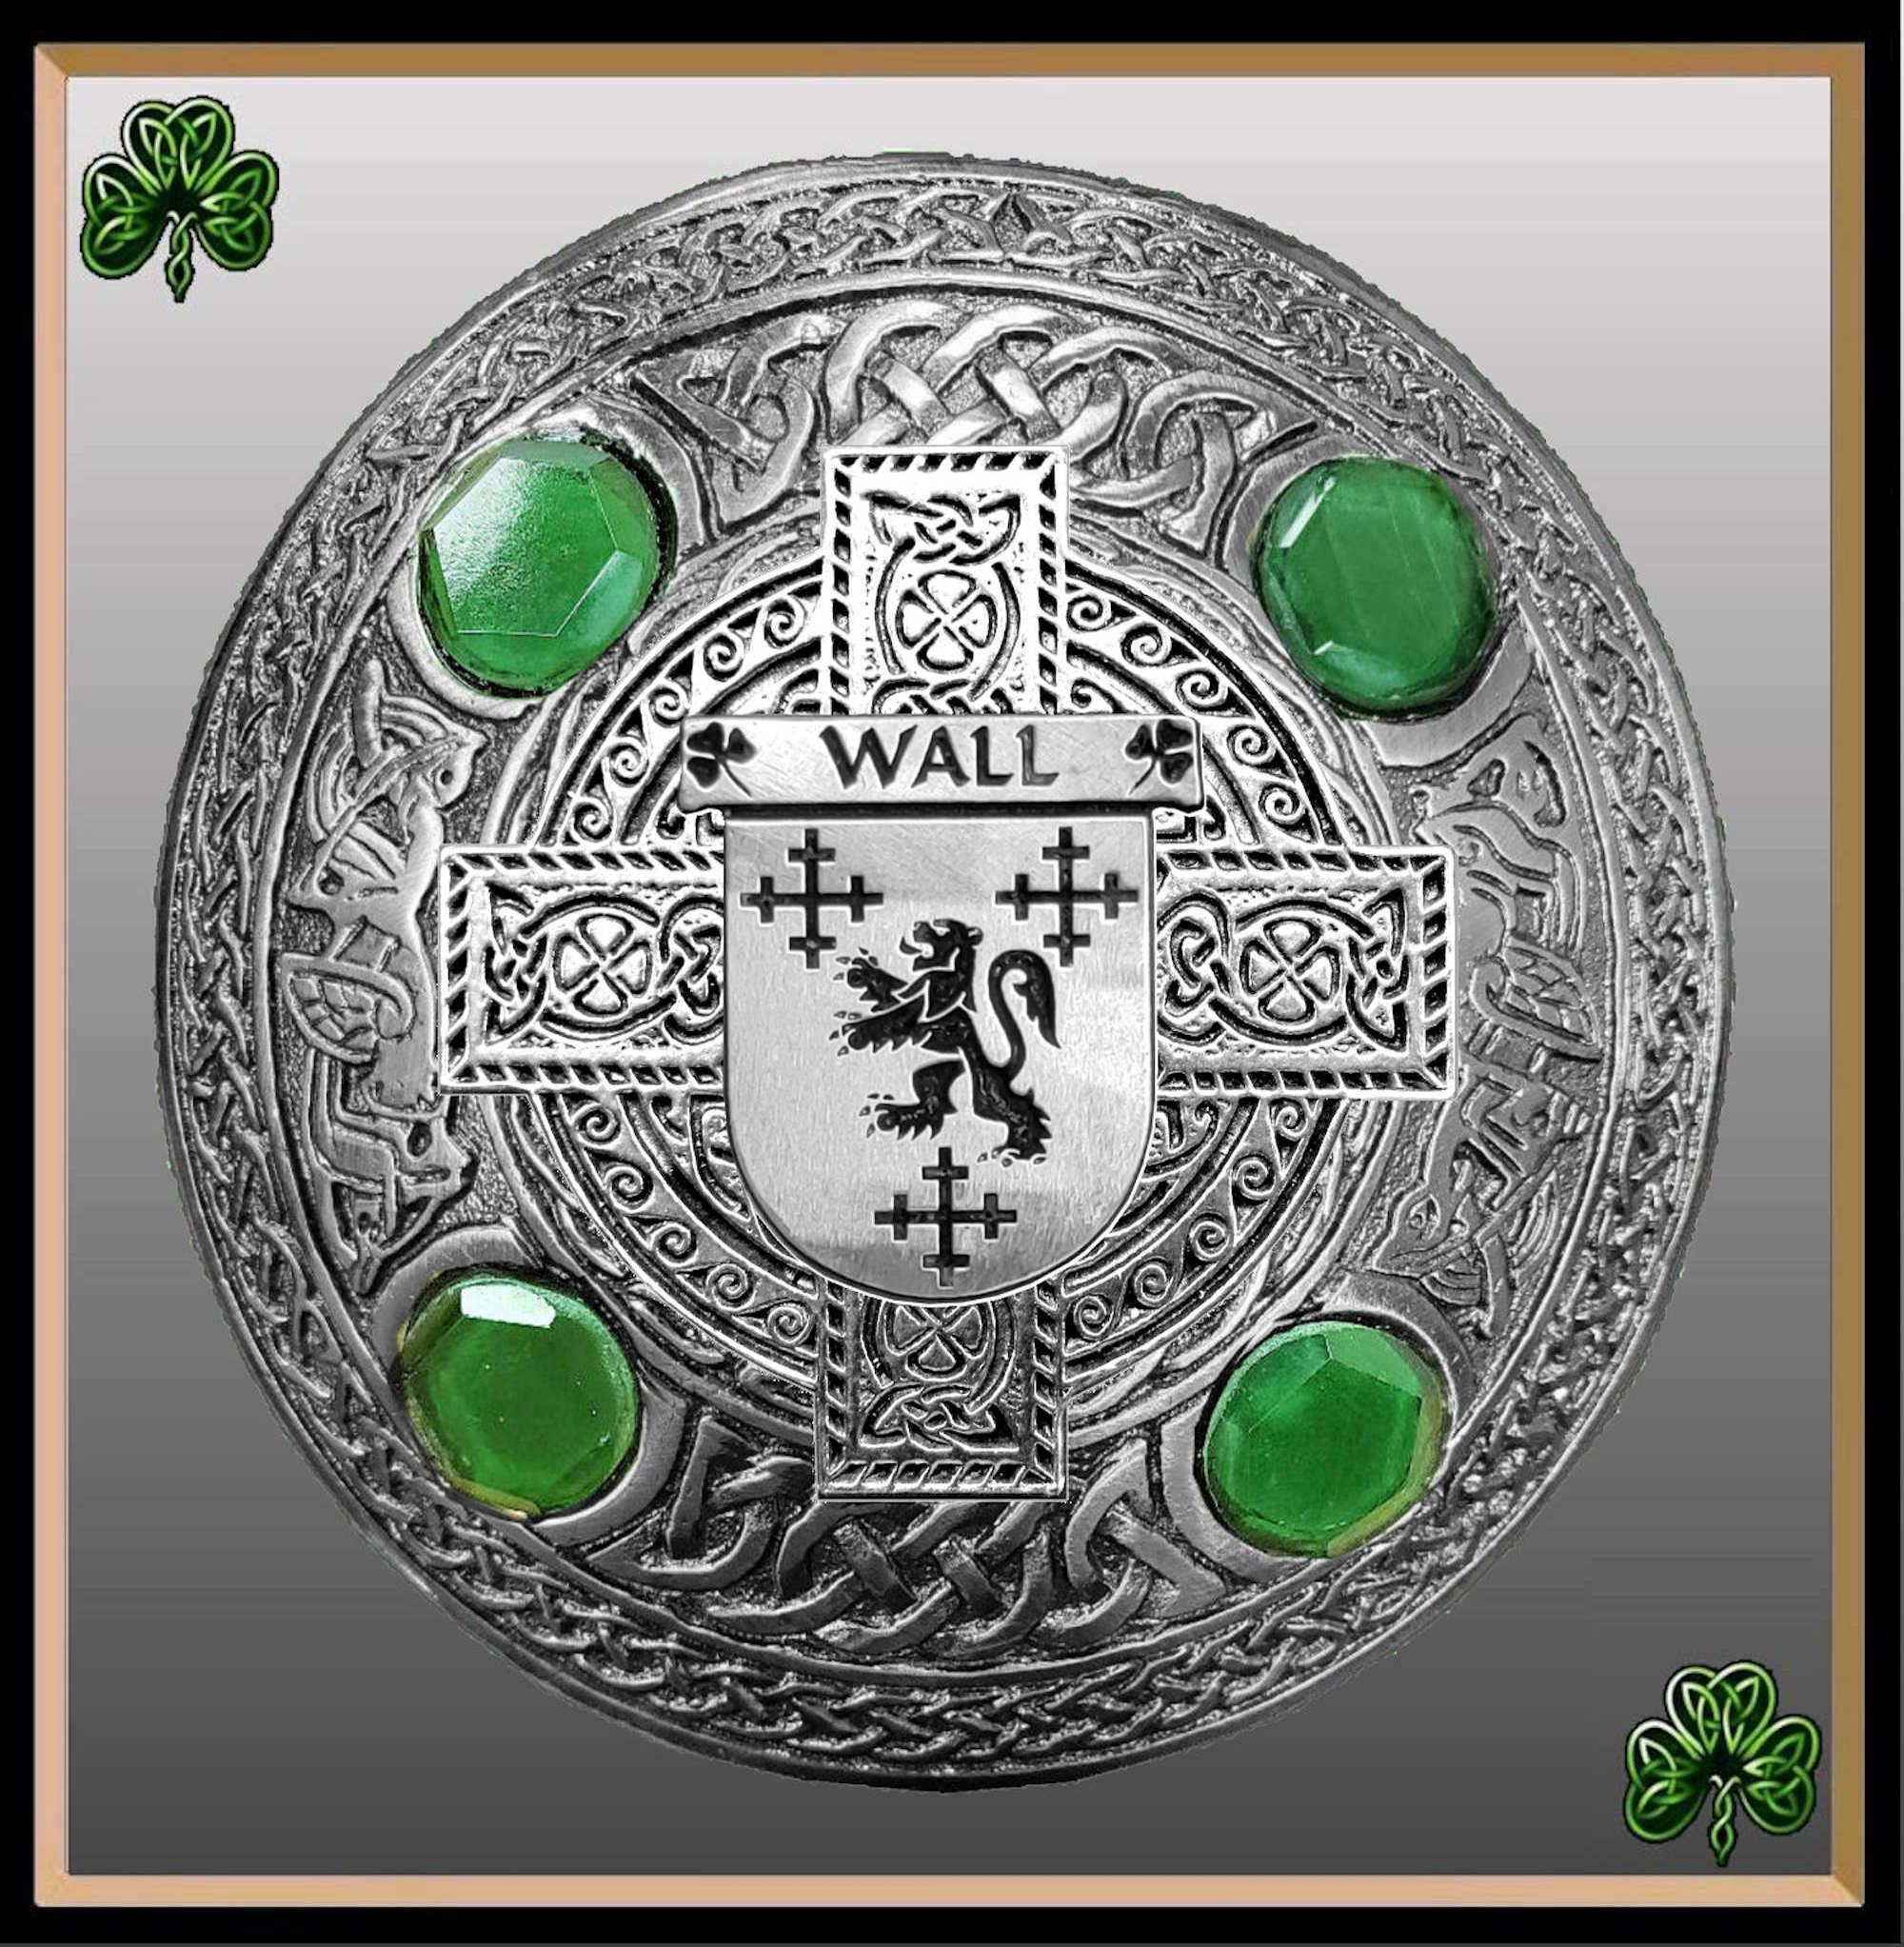 Wall Irish Coat of Arms Celtic Cross Plaid Brooch with Green Stones